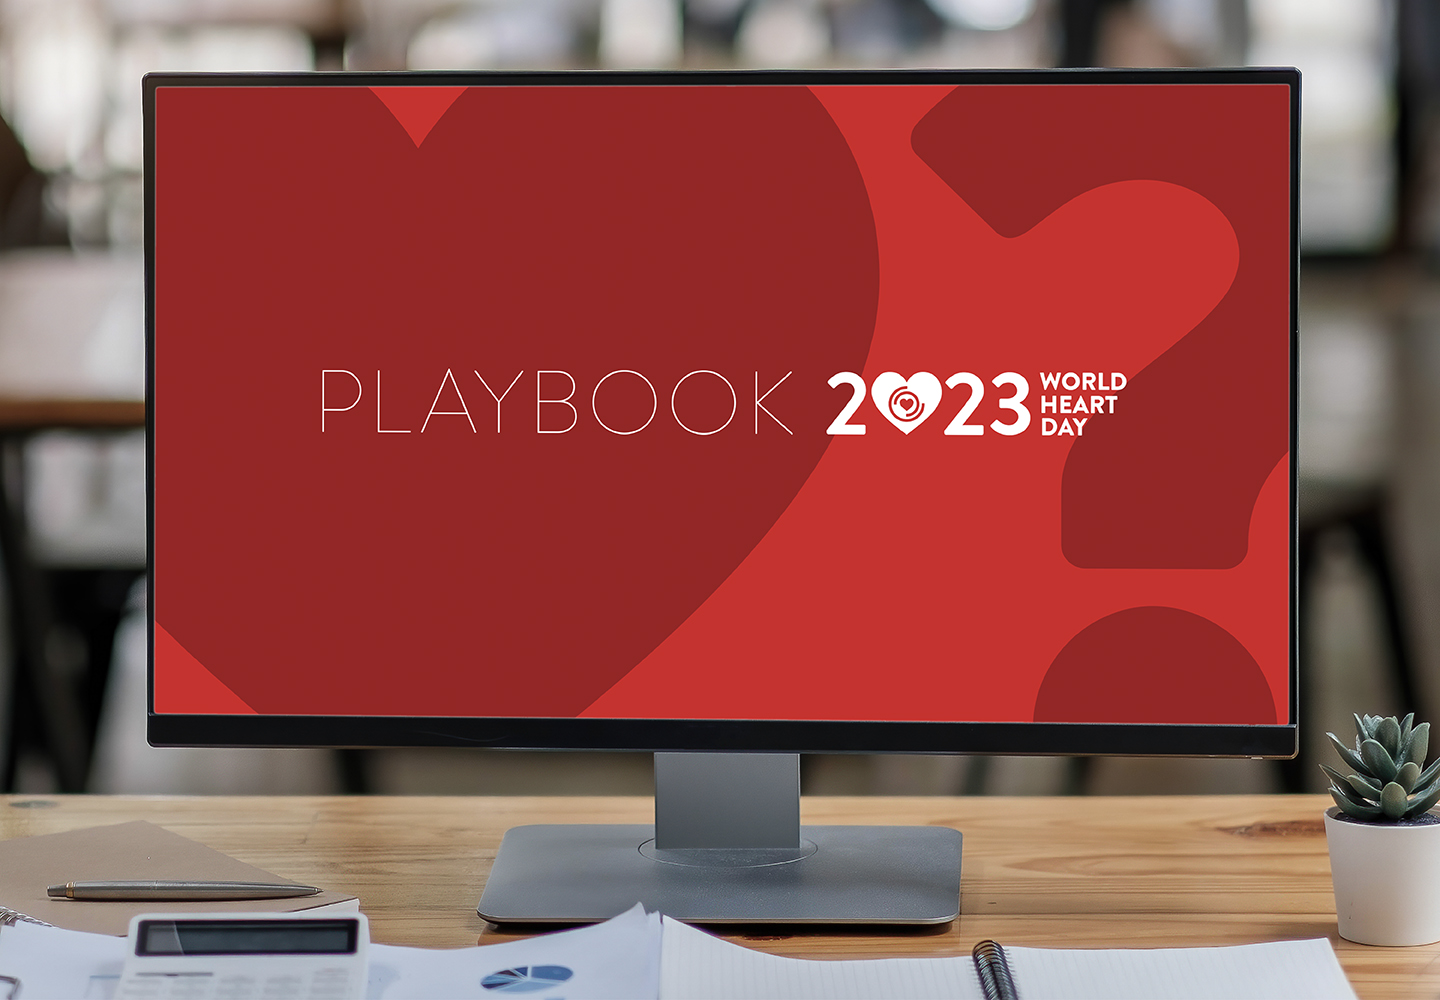 Desktop monitor showing the World Heart Day 2023 playbook